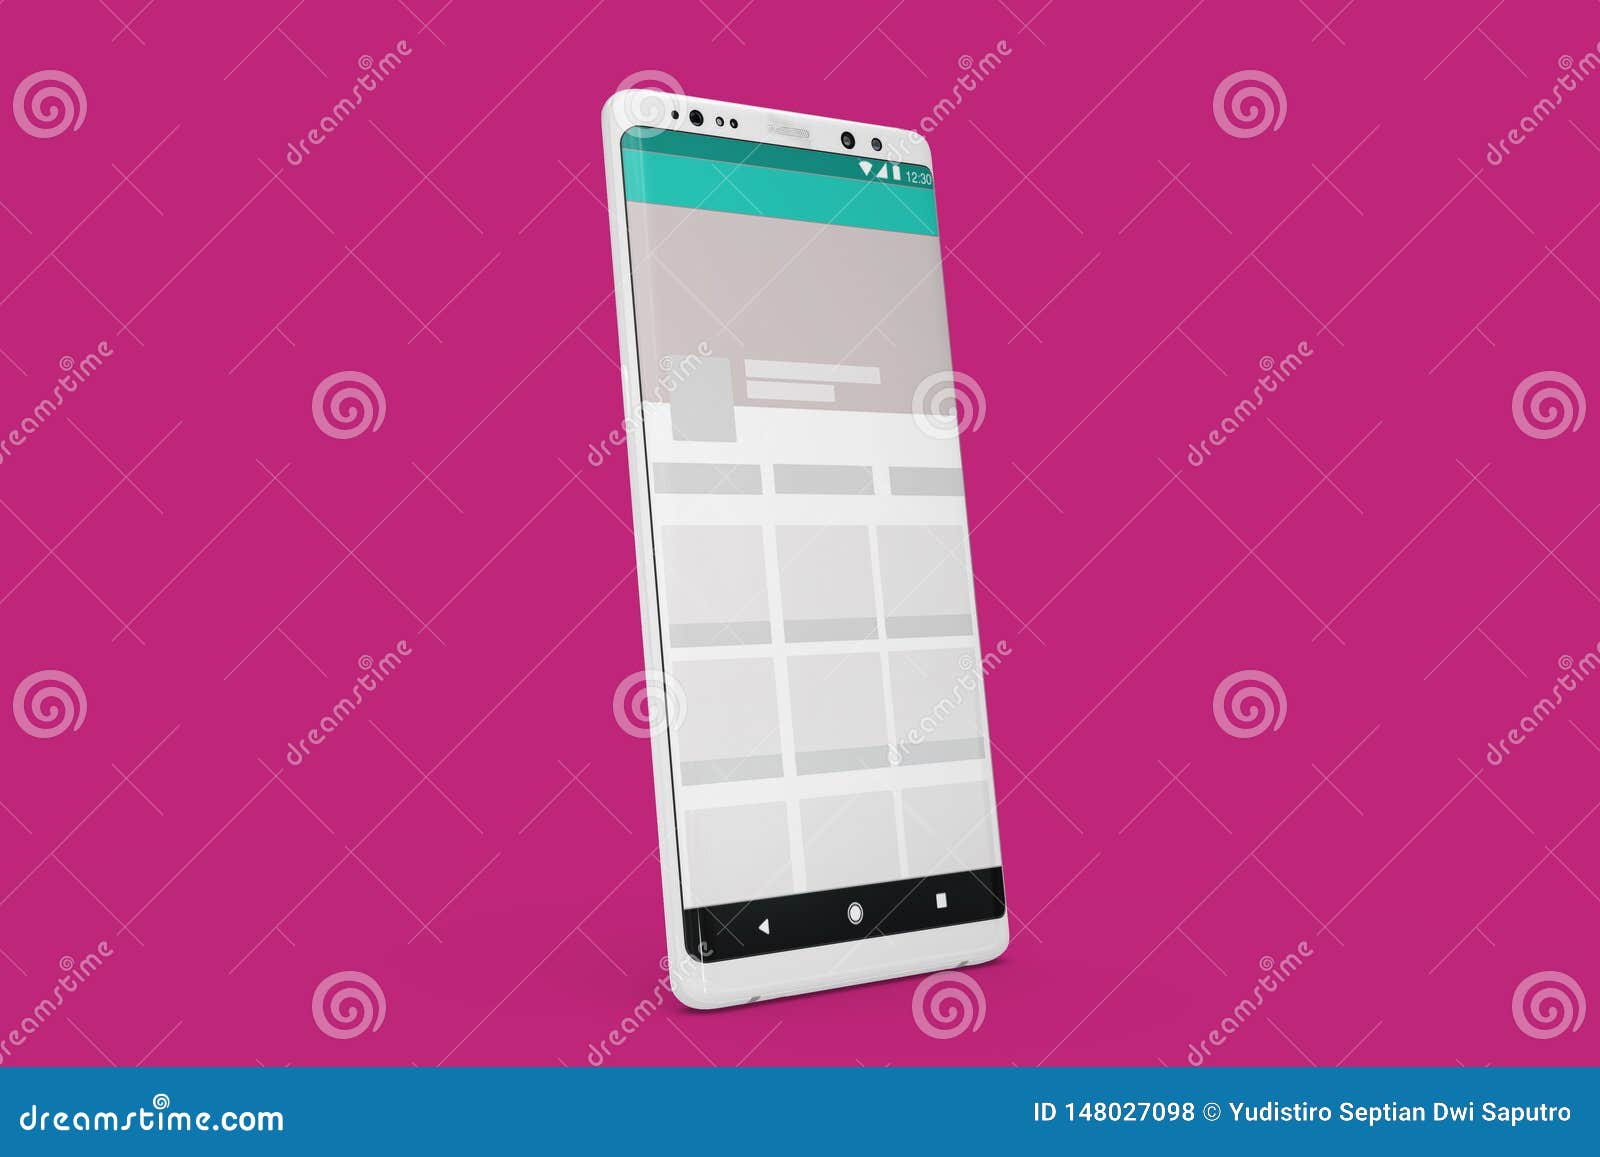 android profile galery mock up